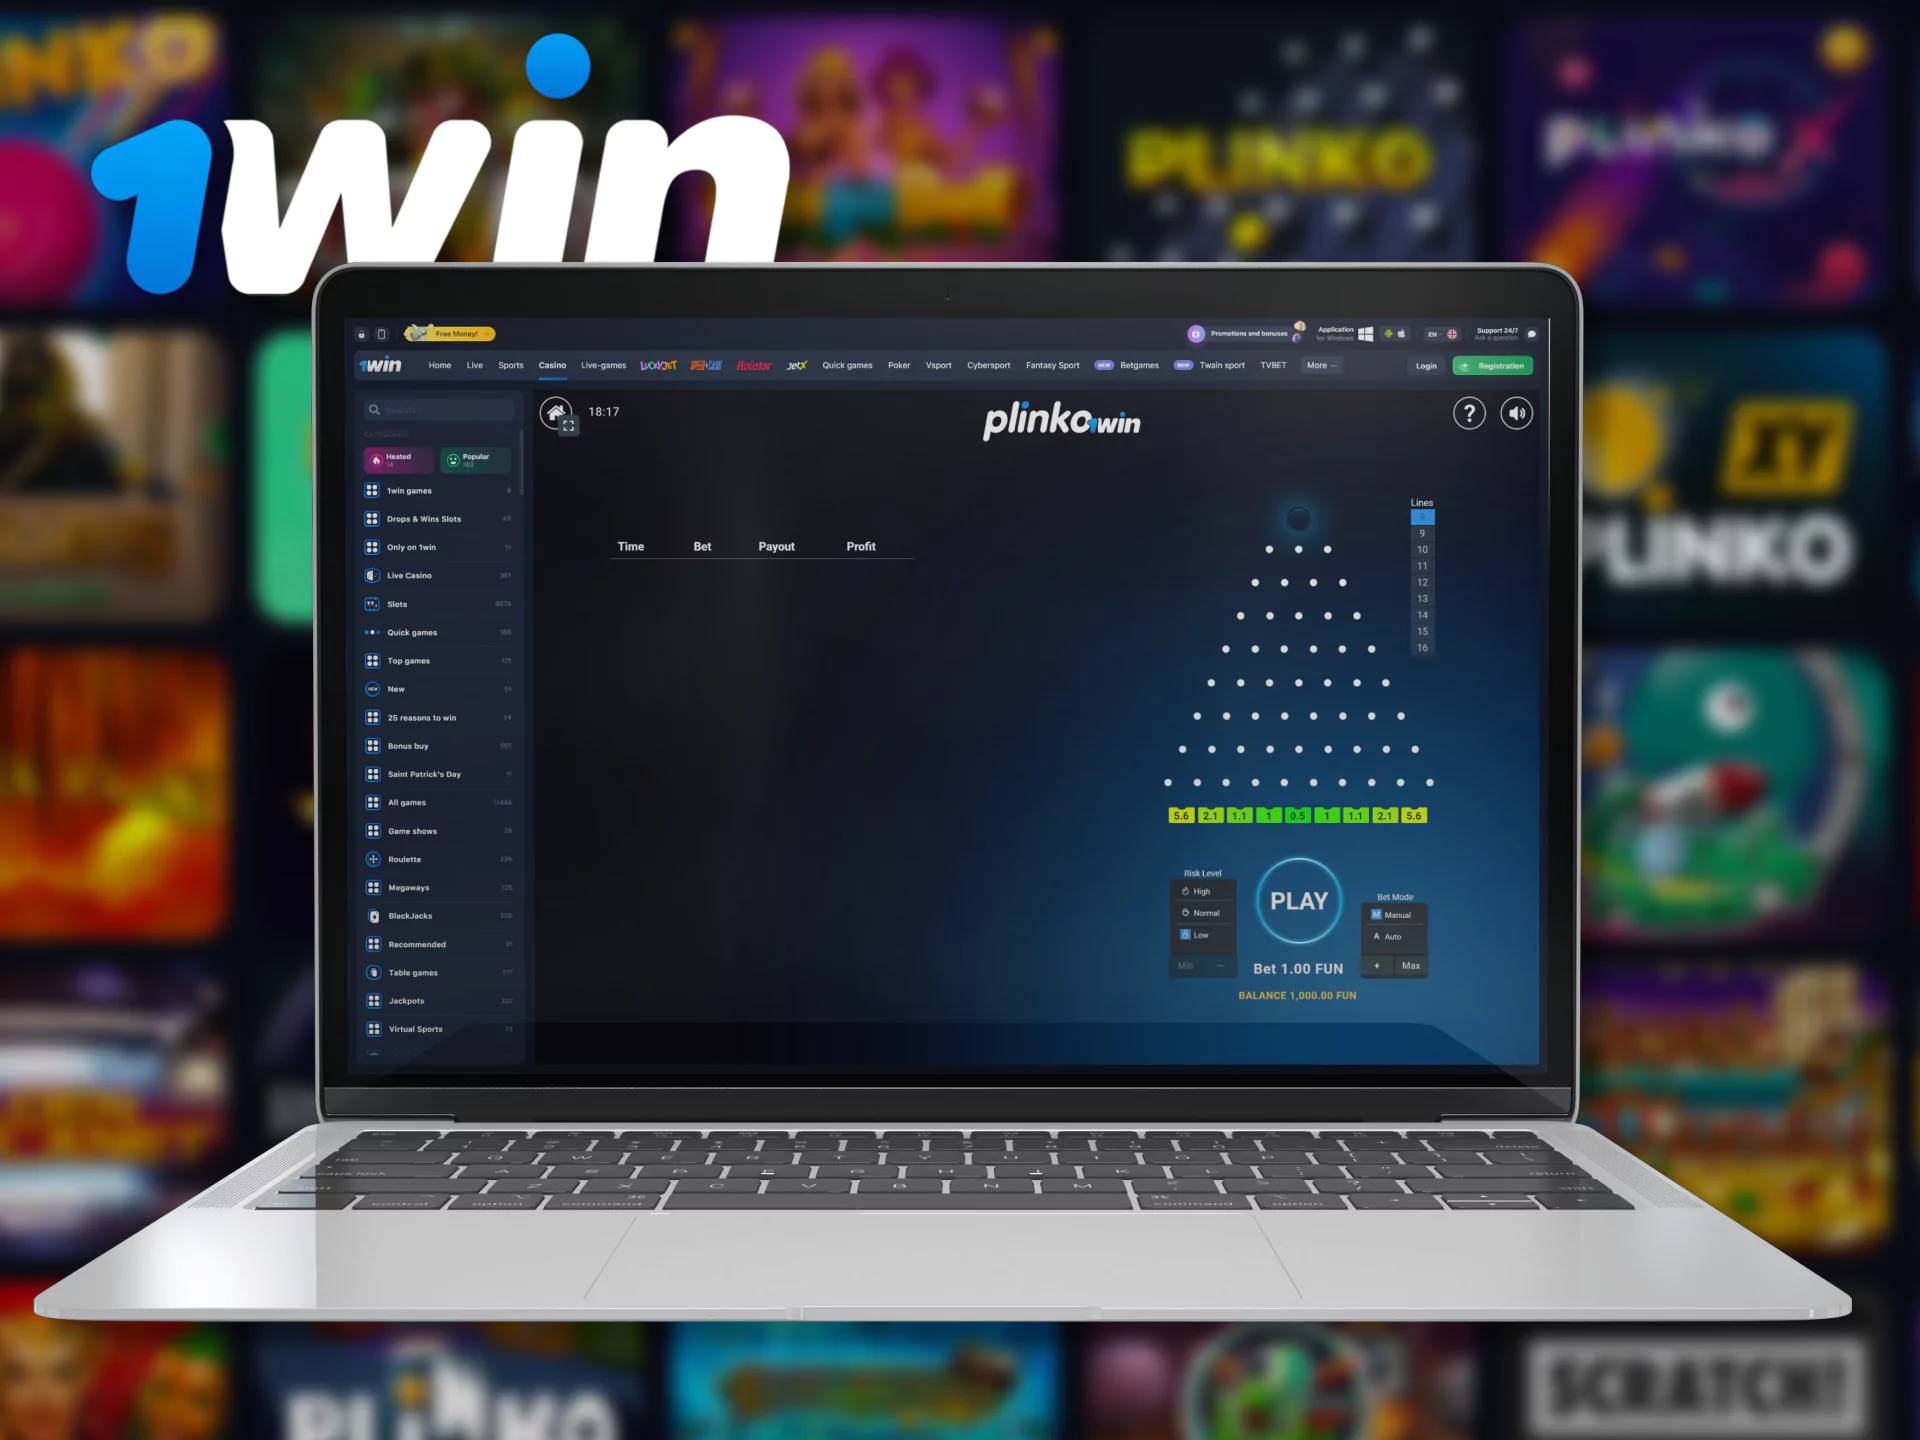 Try playing the plinko demo version on 1Win.